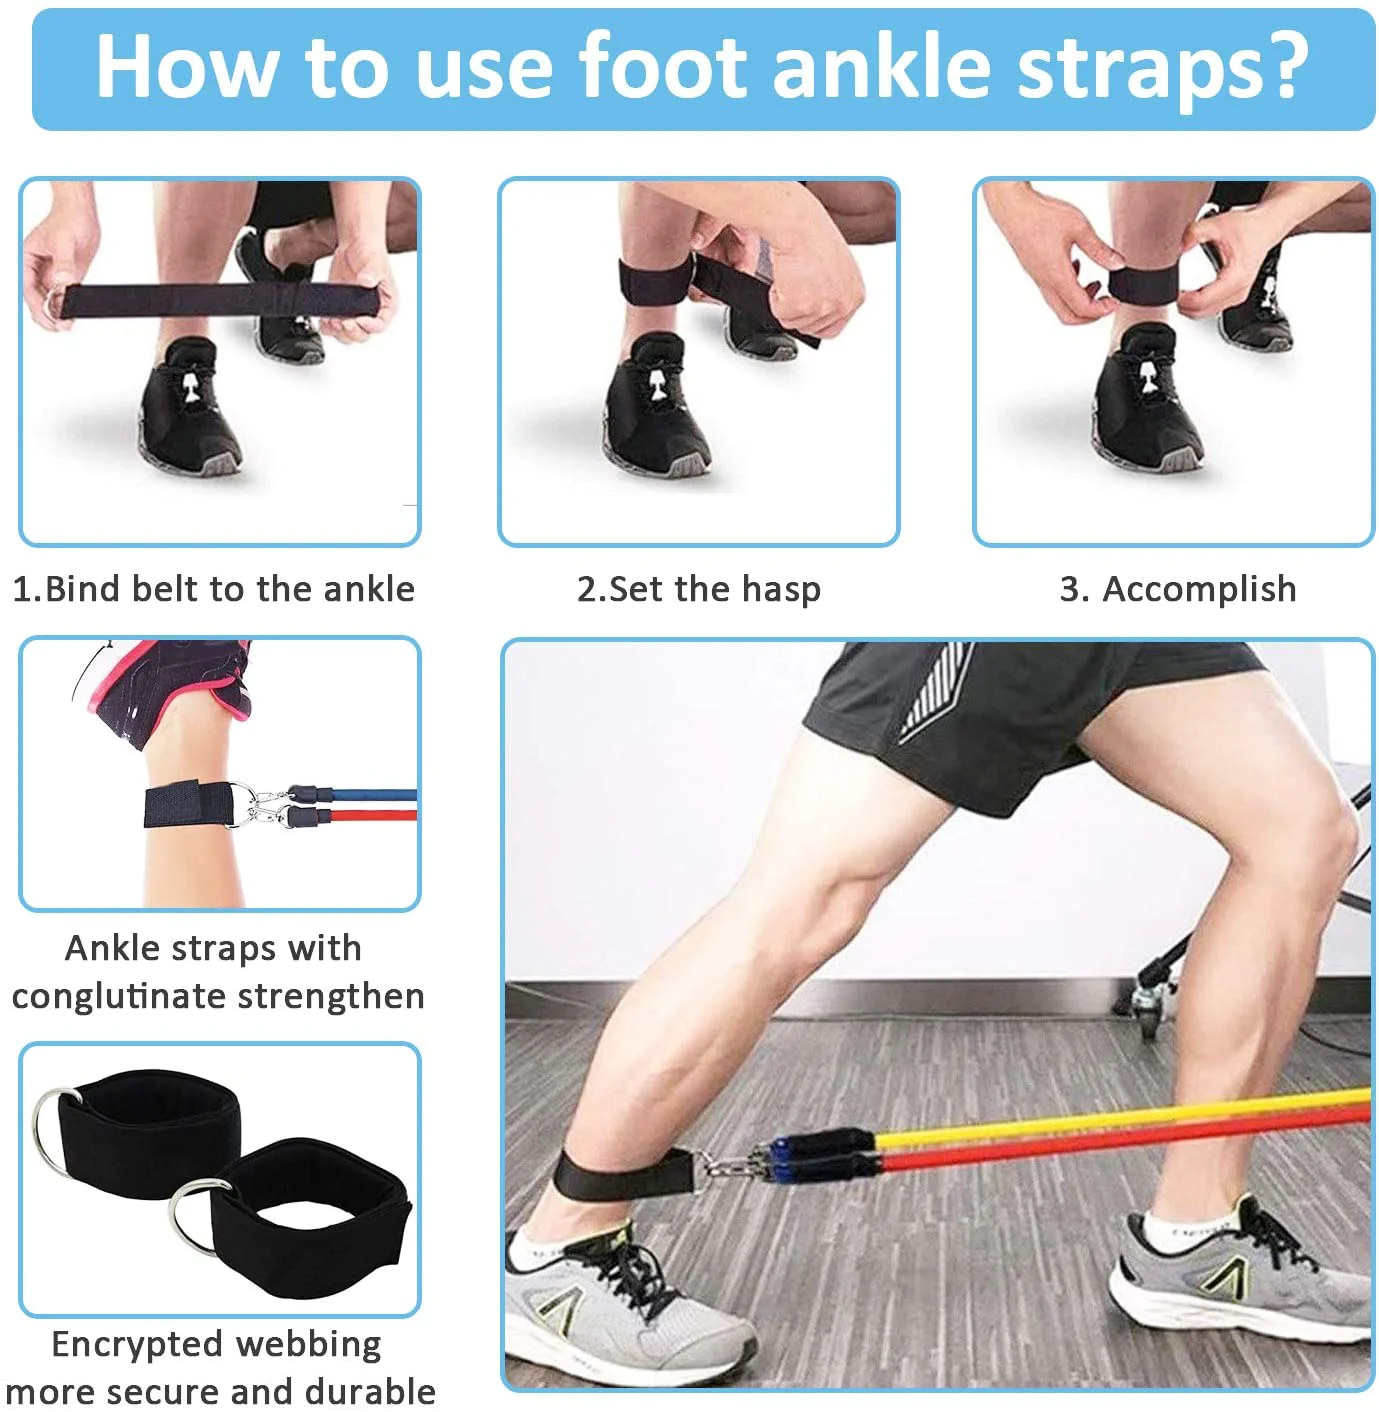 How to use foot ankle straps